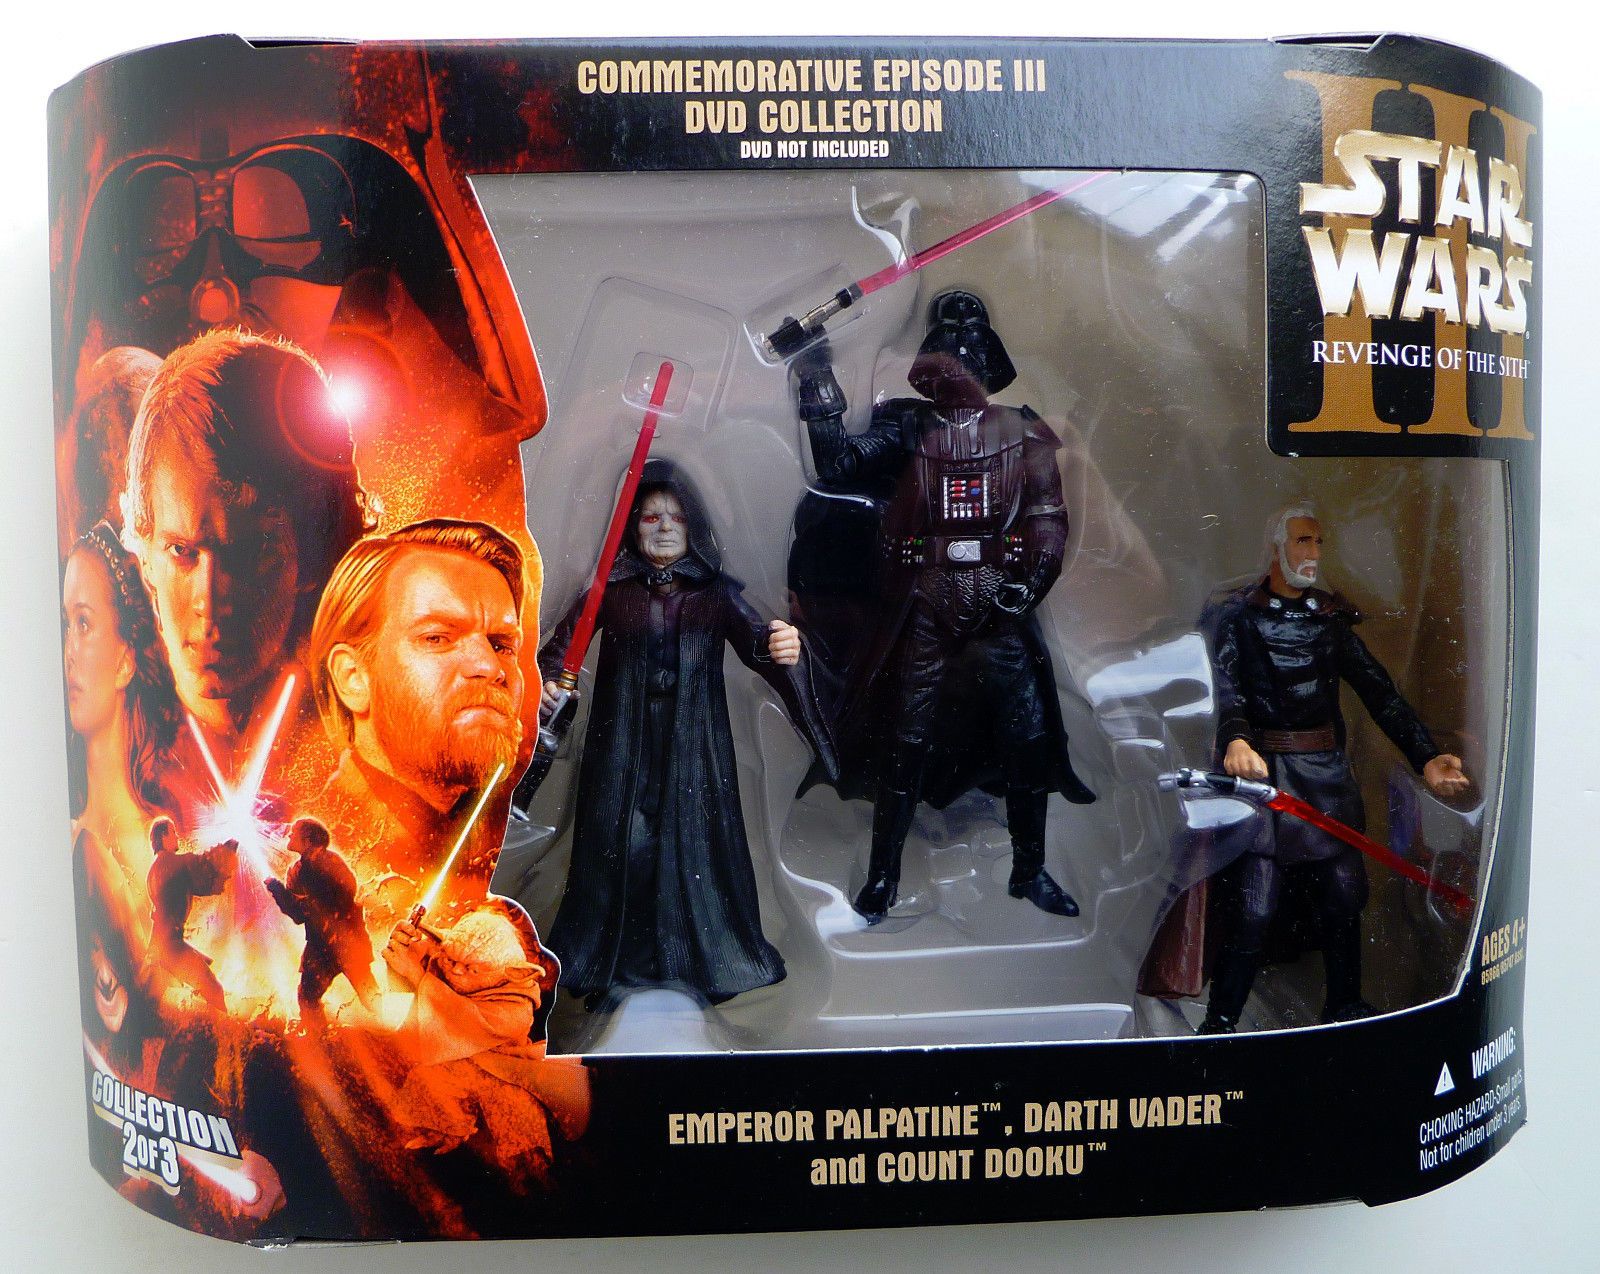 Darth Vader and Count Dooku Action Figure for sale online Hasbro Star Wars Commemorative Episode III Collection Emperor Palpatine 